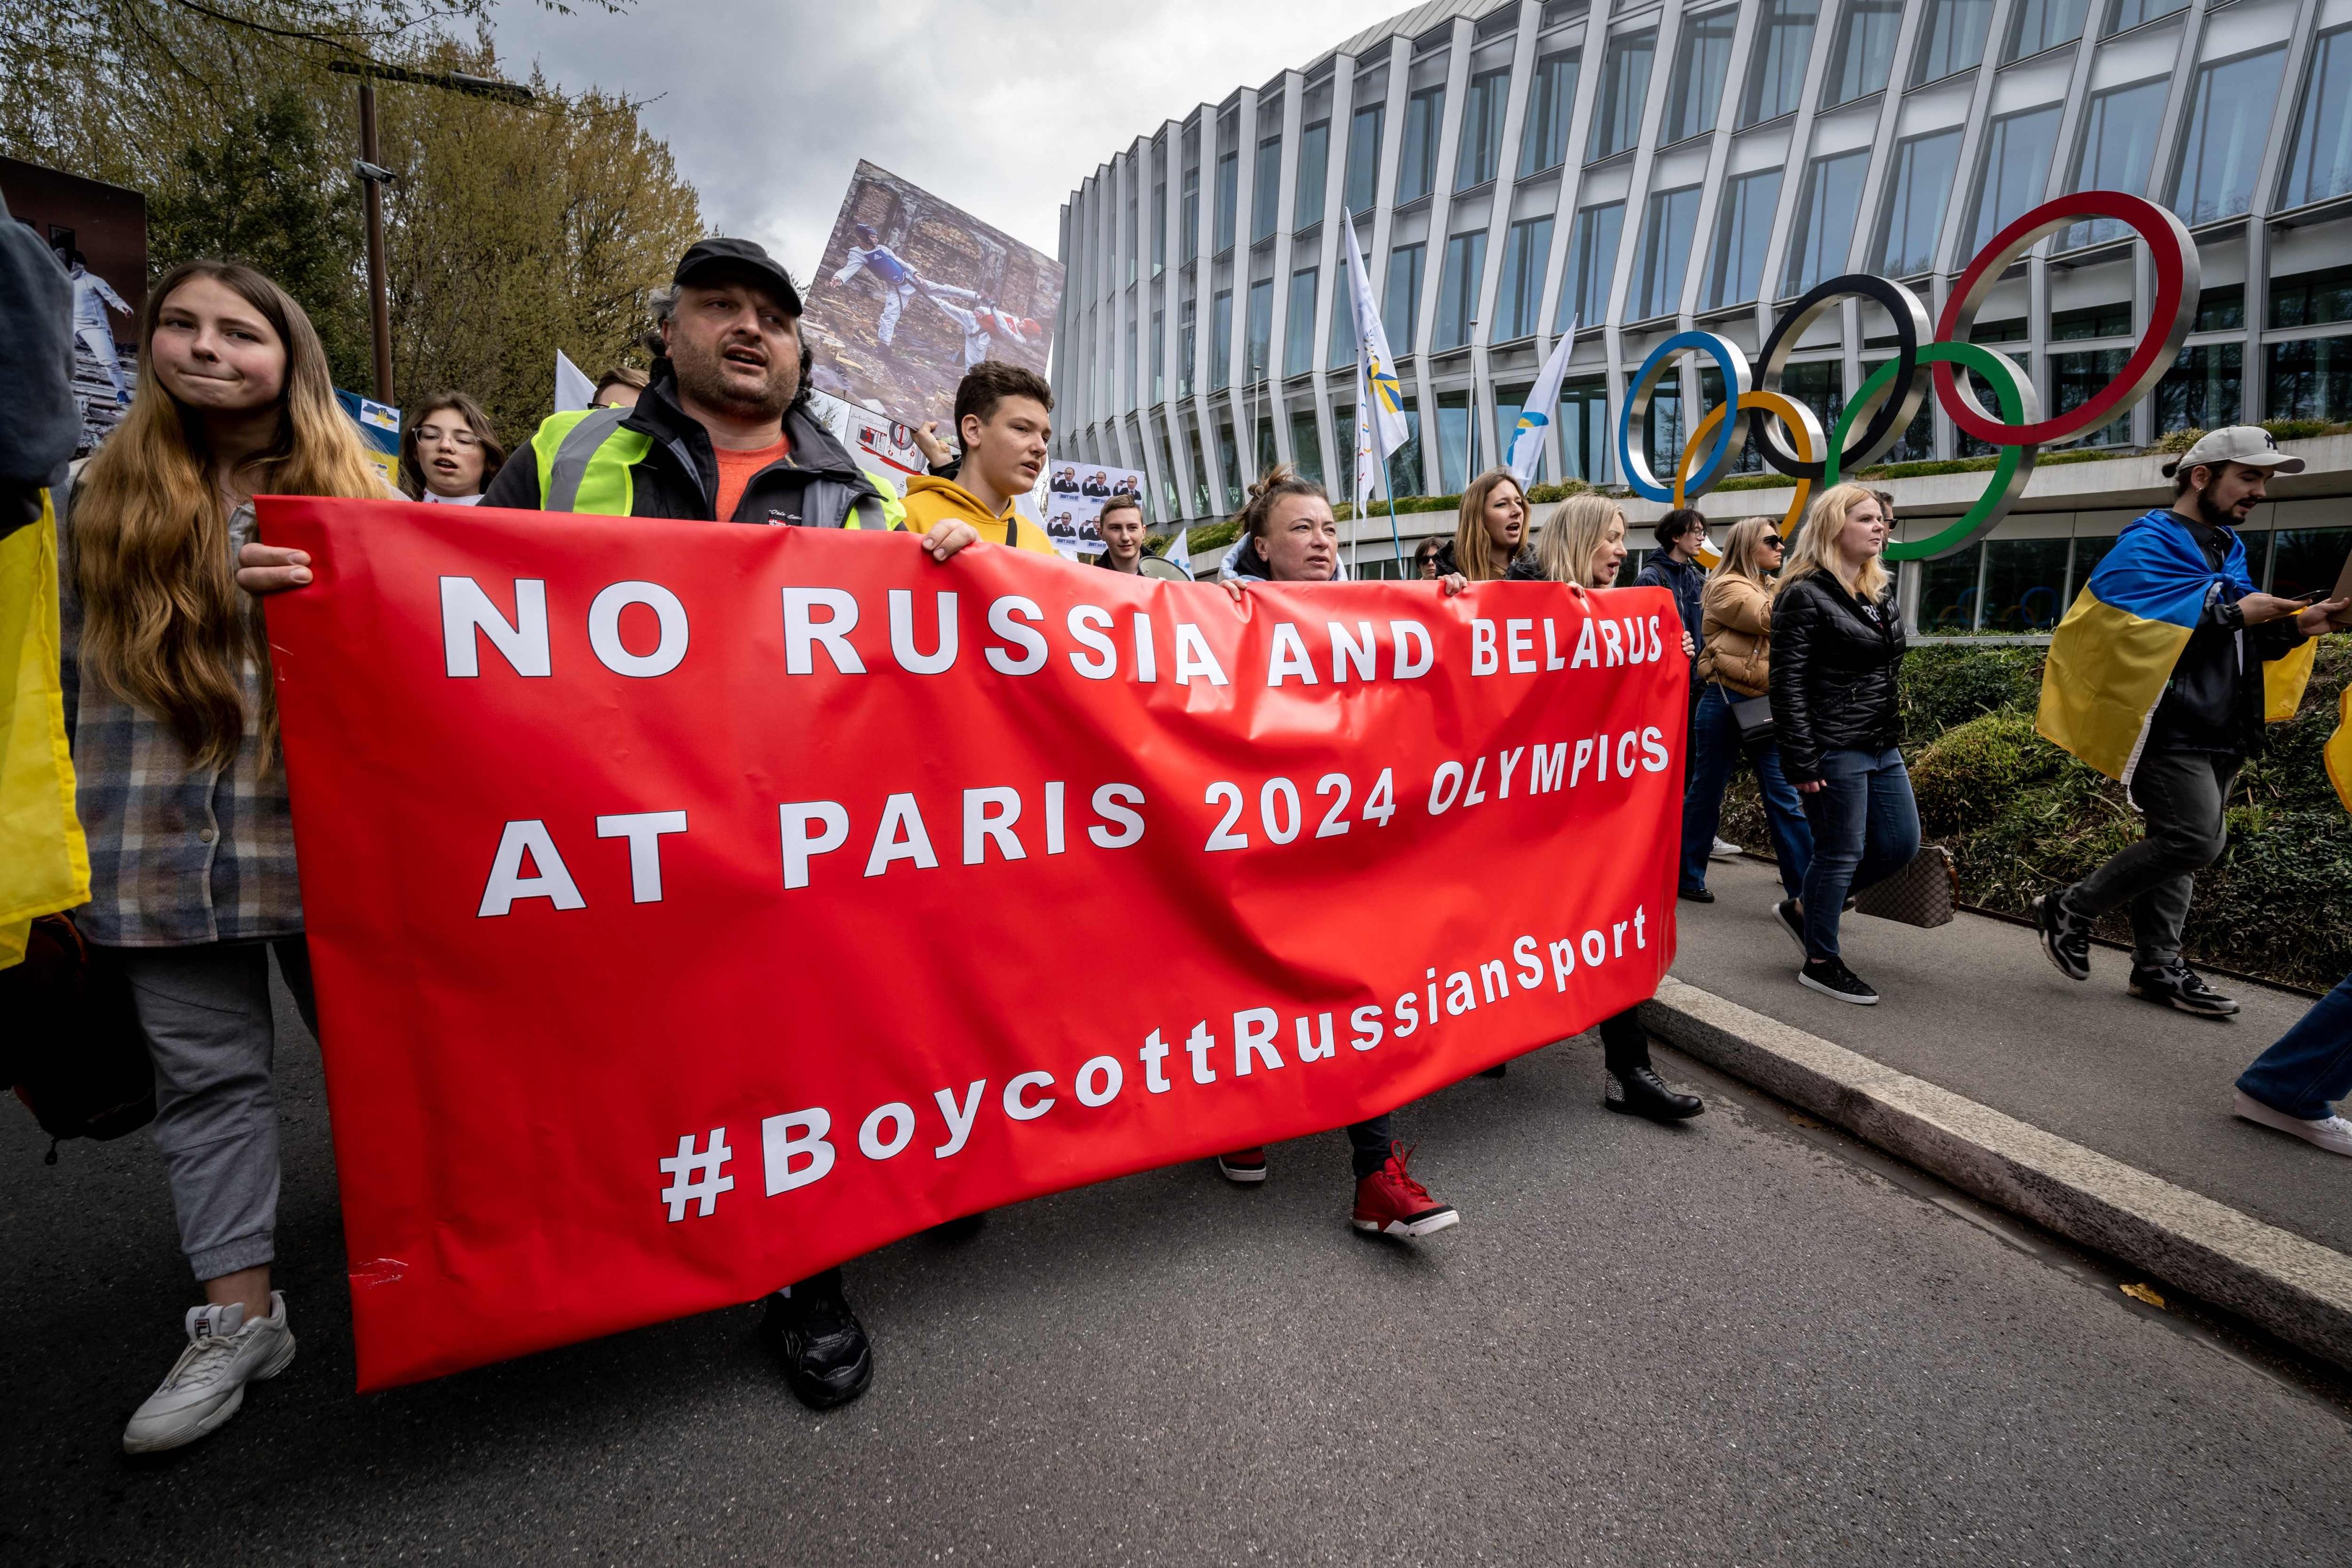 Ukrainians outside International Olympic Committee (IOC) headquarters calling for a ban on Russian and Belarusian athletes. Photo: AFP